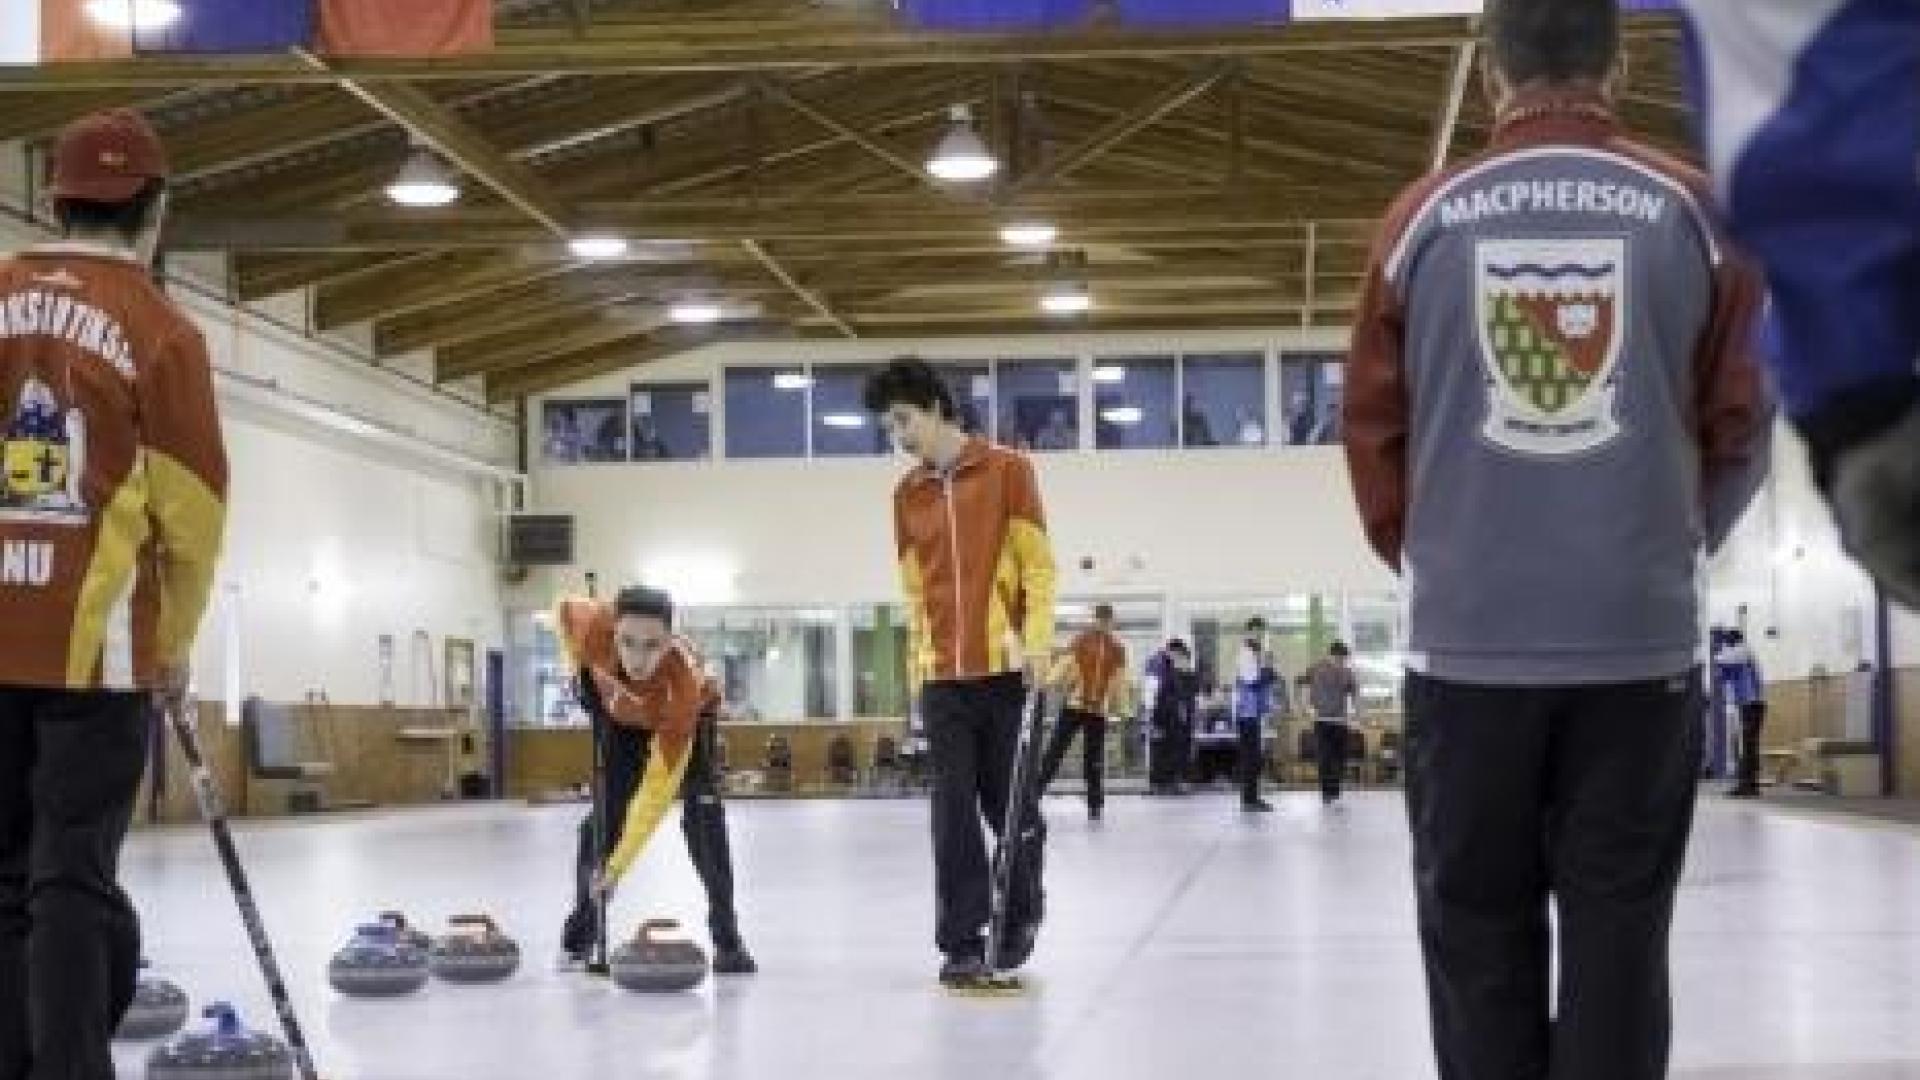 Curling teams playing curling at arena.